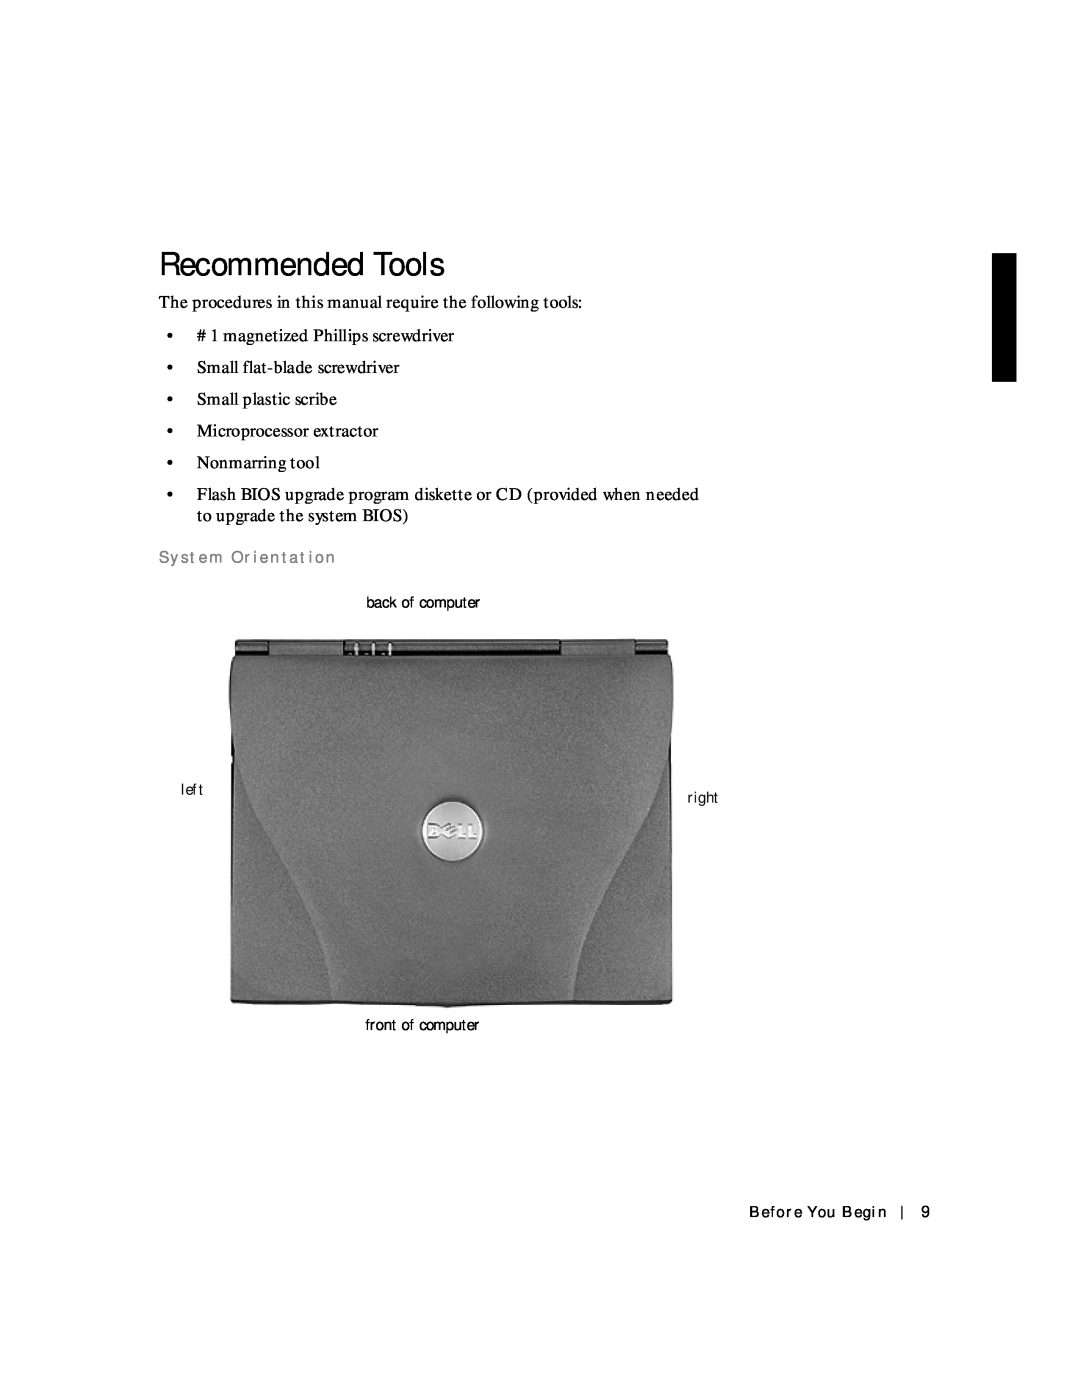 Applied Energy Products C800 service manual Recommended Tools, The procedures in this manual require the following tools 